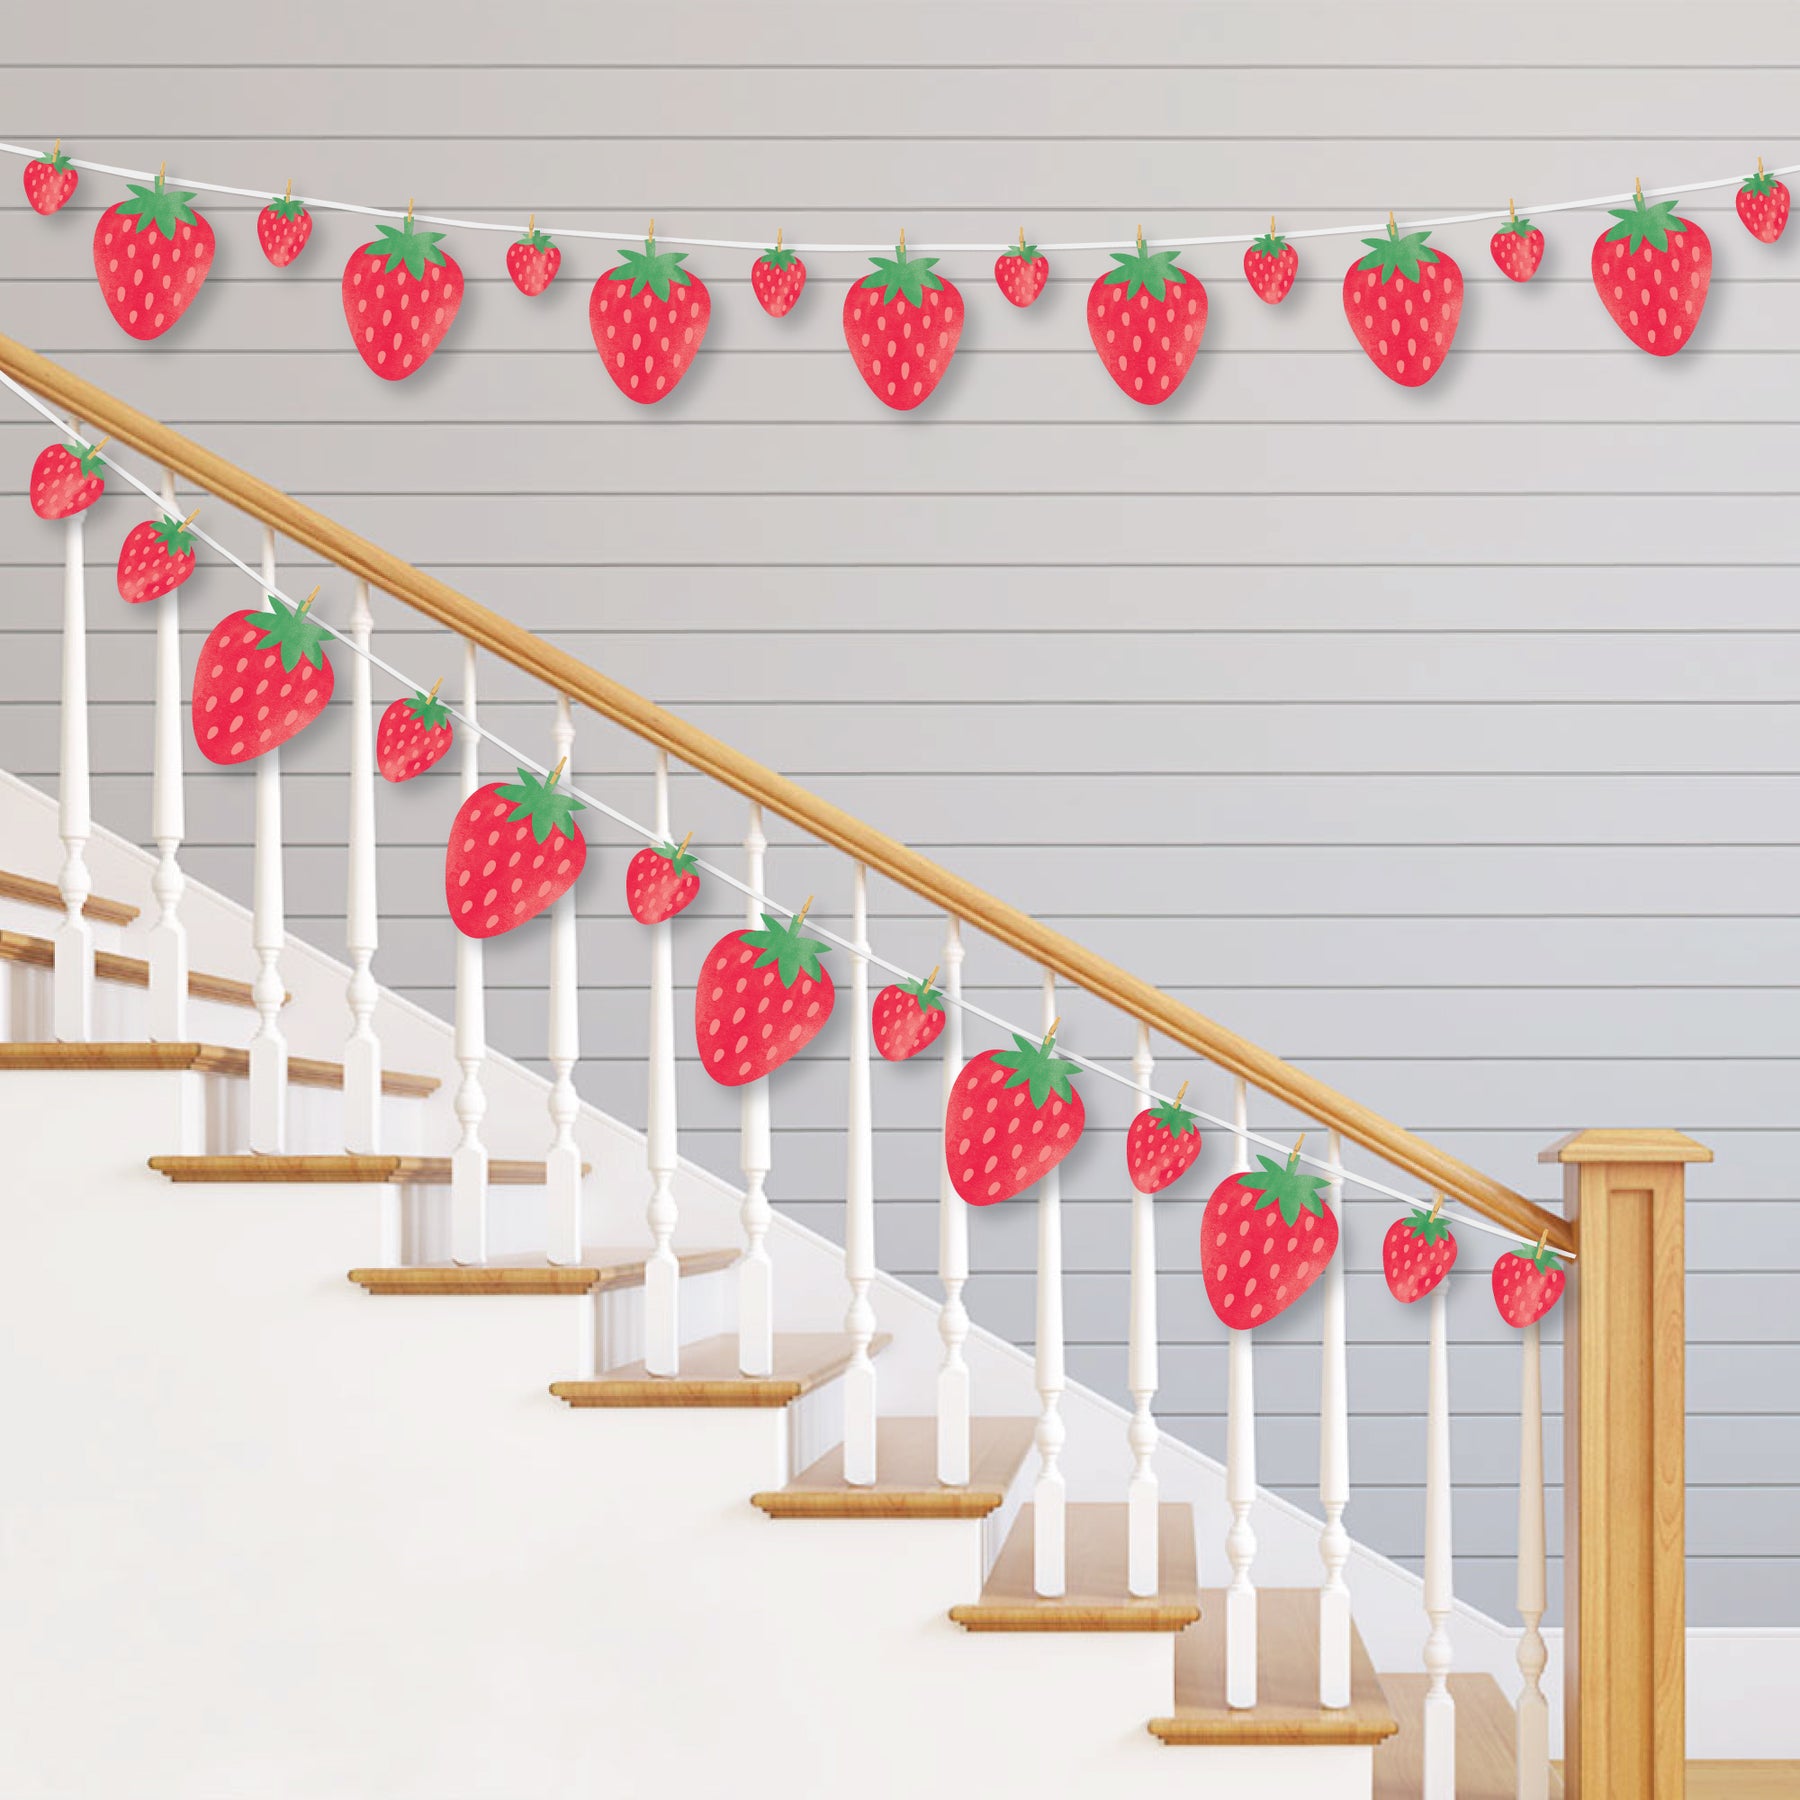 Strawberry Baby Shower Decorations, NO-DIY A Berry Sweet Baby Is On The Way  Banner, Berry Sweet Baby Shower Decorations, Strawberry Party Decorations